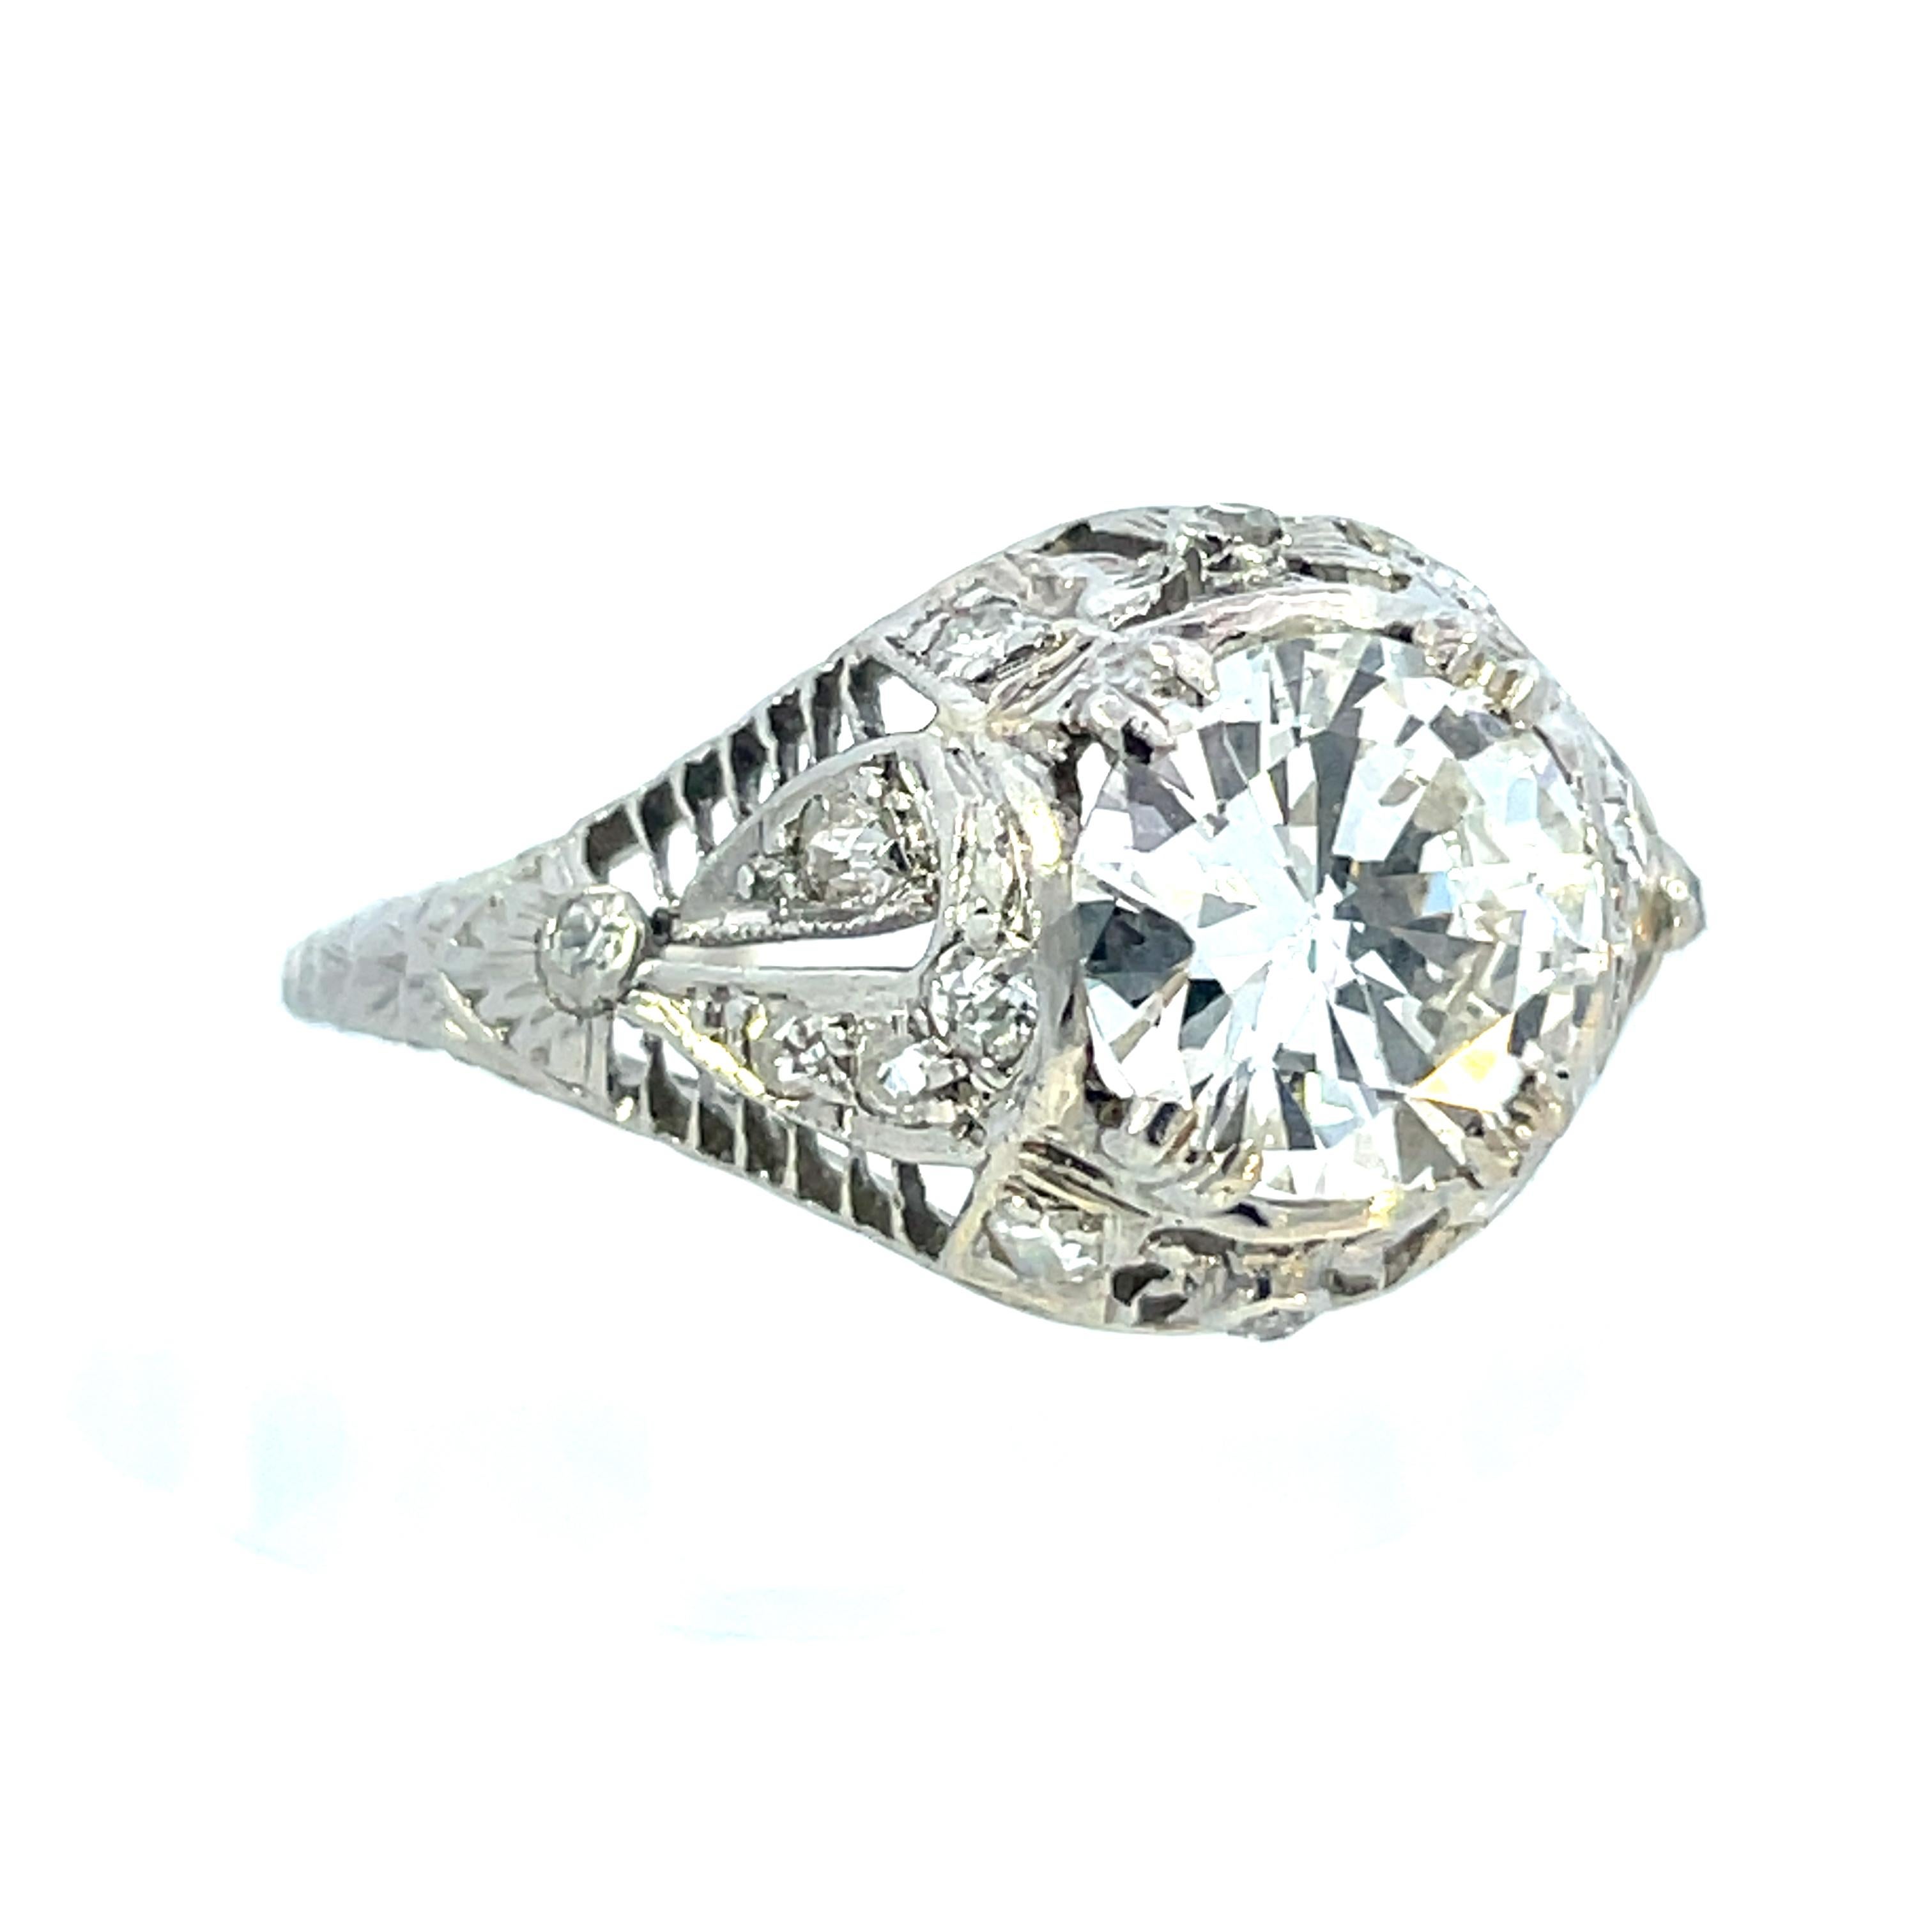 This diamond ring from the 1910s captures the essence of the Edwardian era with its intricate filigree work and delicate design. Crafted in platinum, this is a forever white metal unlike gold. Platinum’s natural white sheen complements the dazzling